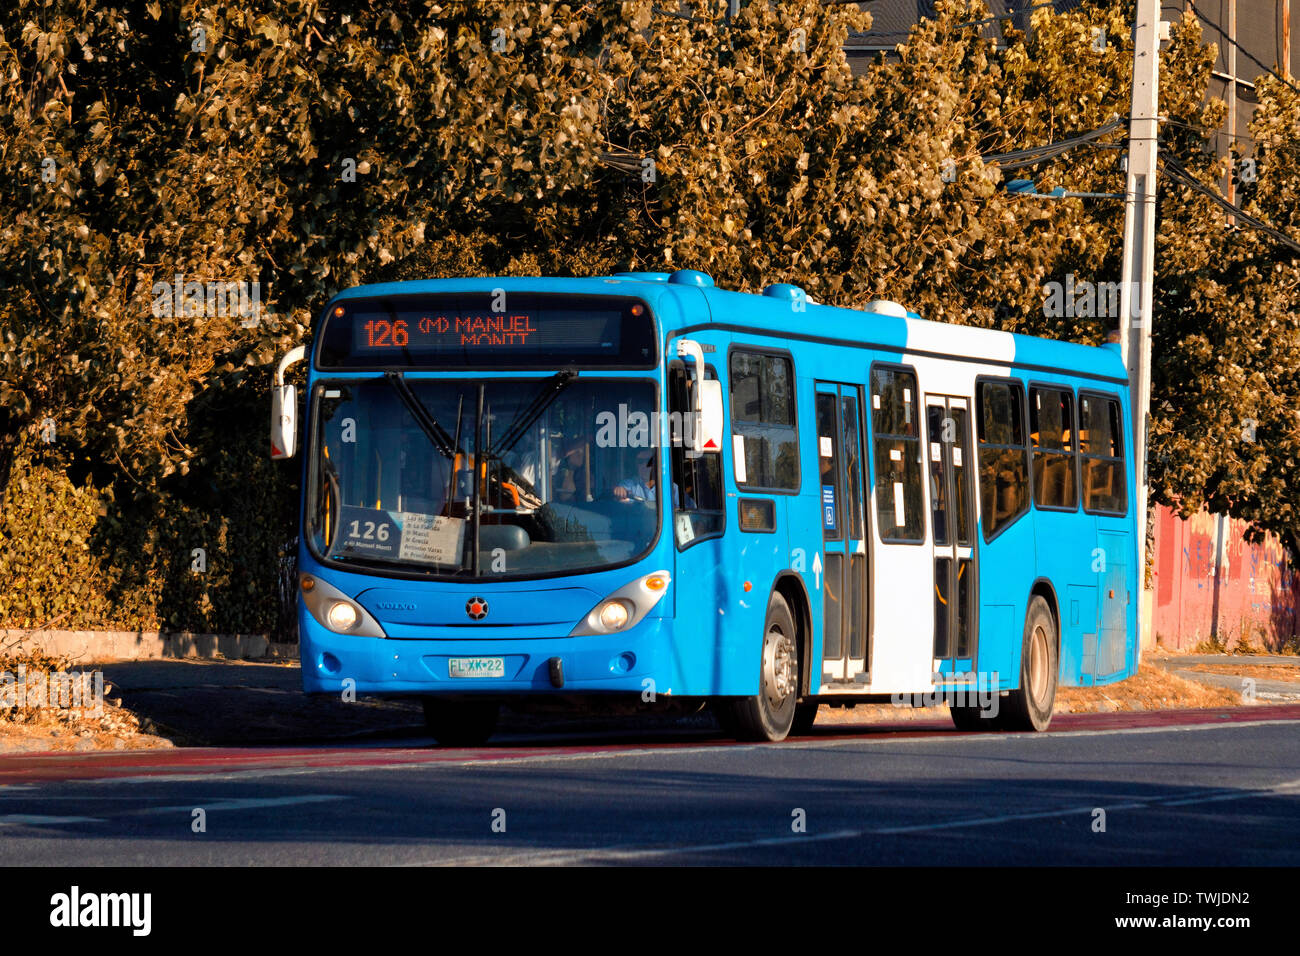 SANTIAGO, CHILE - FEBRUARY 2016: A Transantiago public system bus on the road Stock Photo